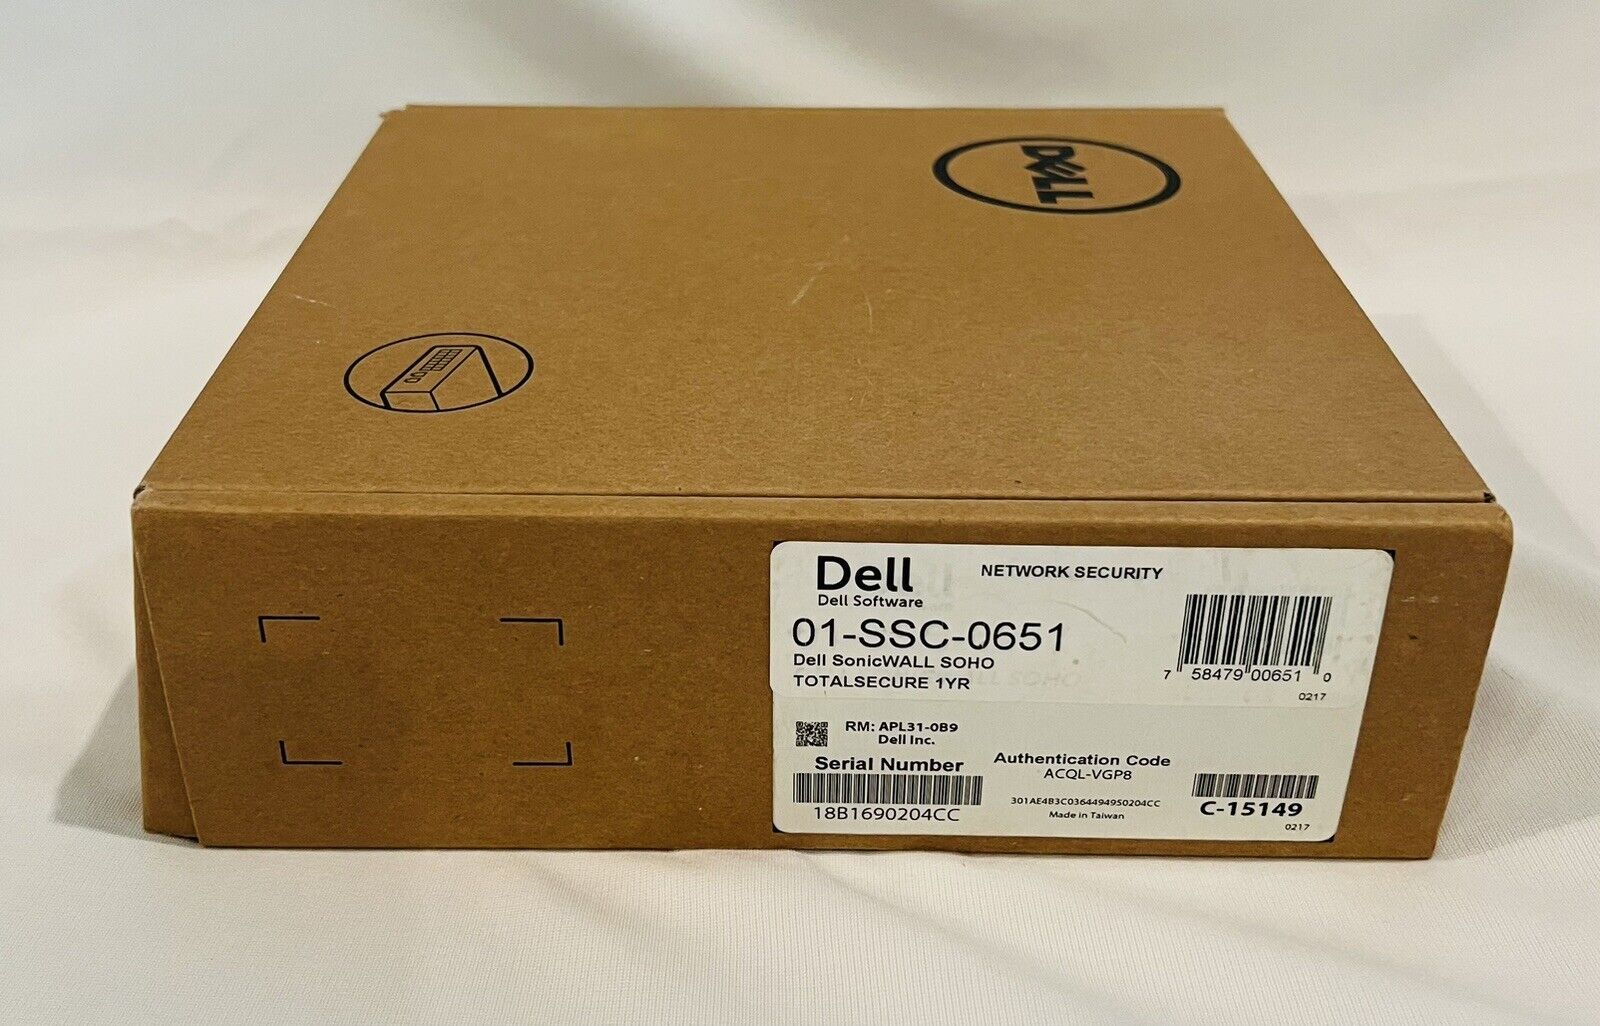 Dell SonicWALL SOHO 01-SSC-0651 Computer Network Security Firewall NEW